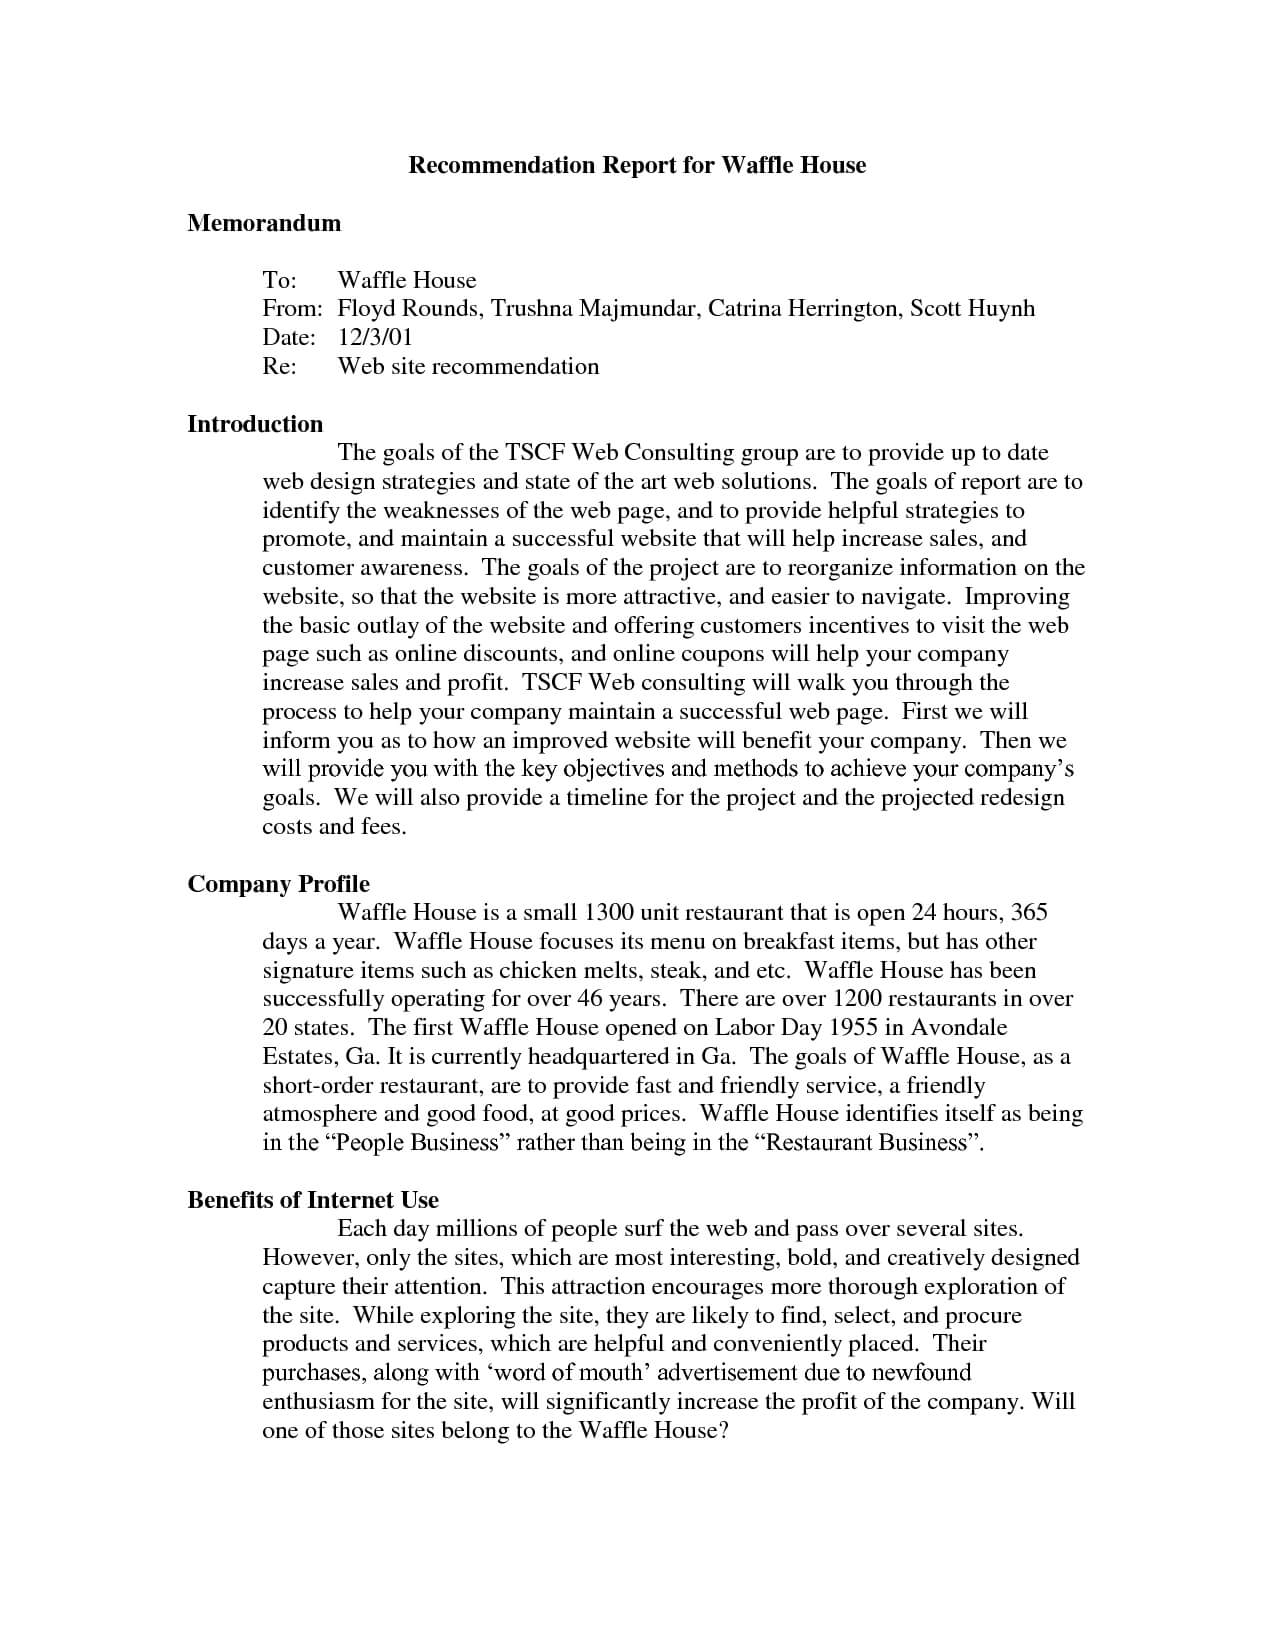 Recommendation Report E Examples Tender Google Docs Throughout Recommendation Report Template